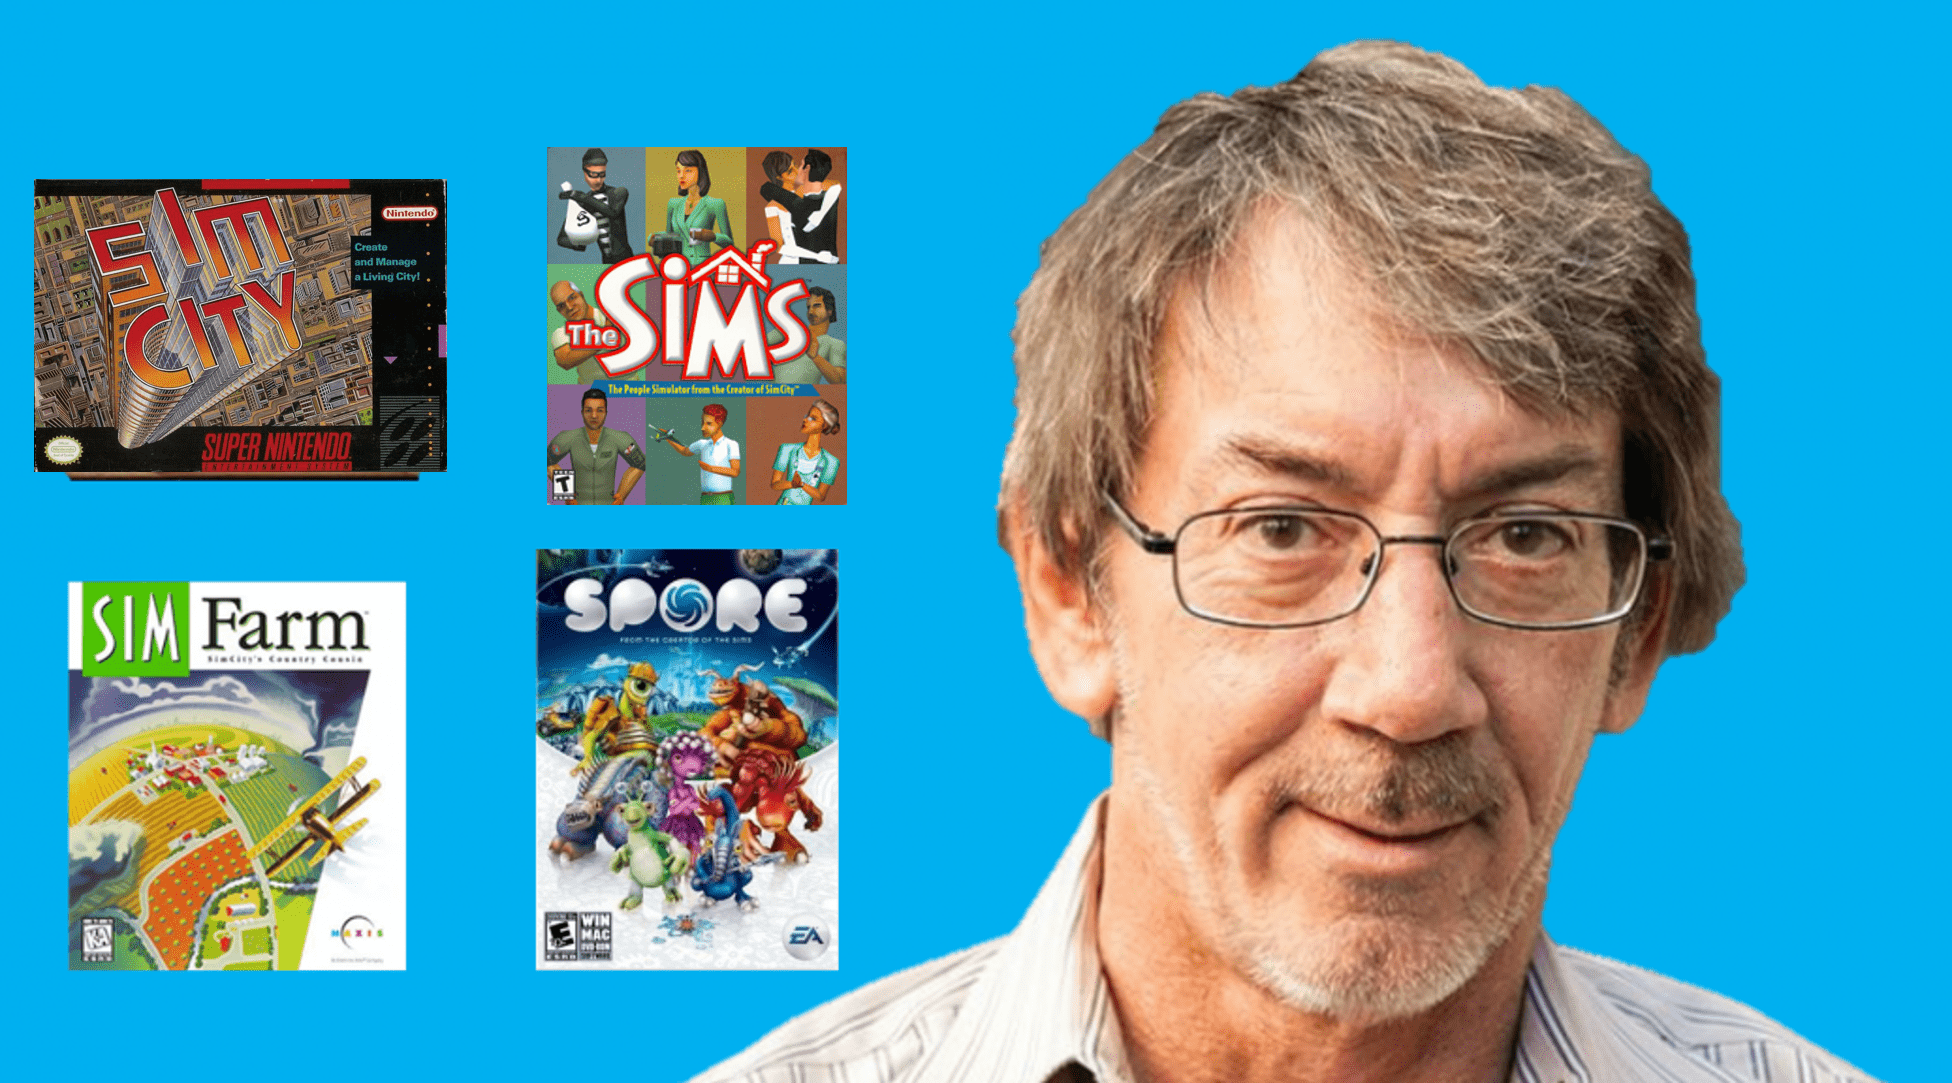 Will Wright's head with several of his largest games represented in superimposed boxes. The games are SimCity on SNES, The Sims on PC, SimFarm on PC, and Spore on PC